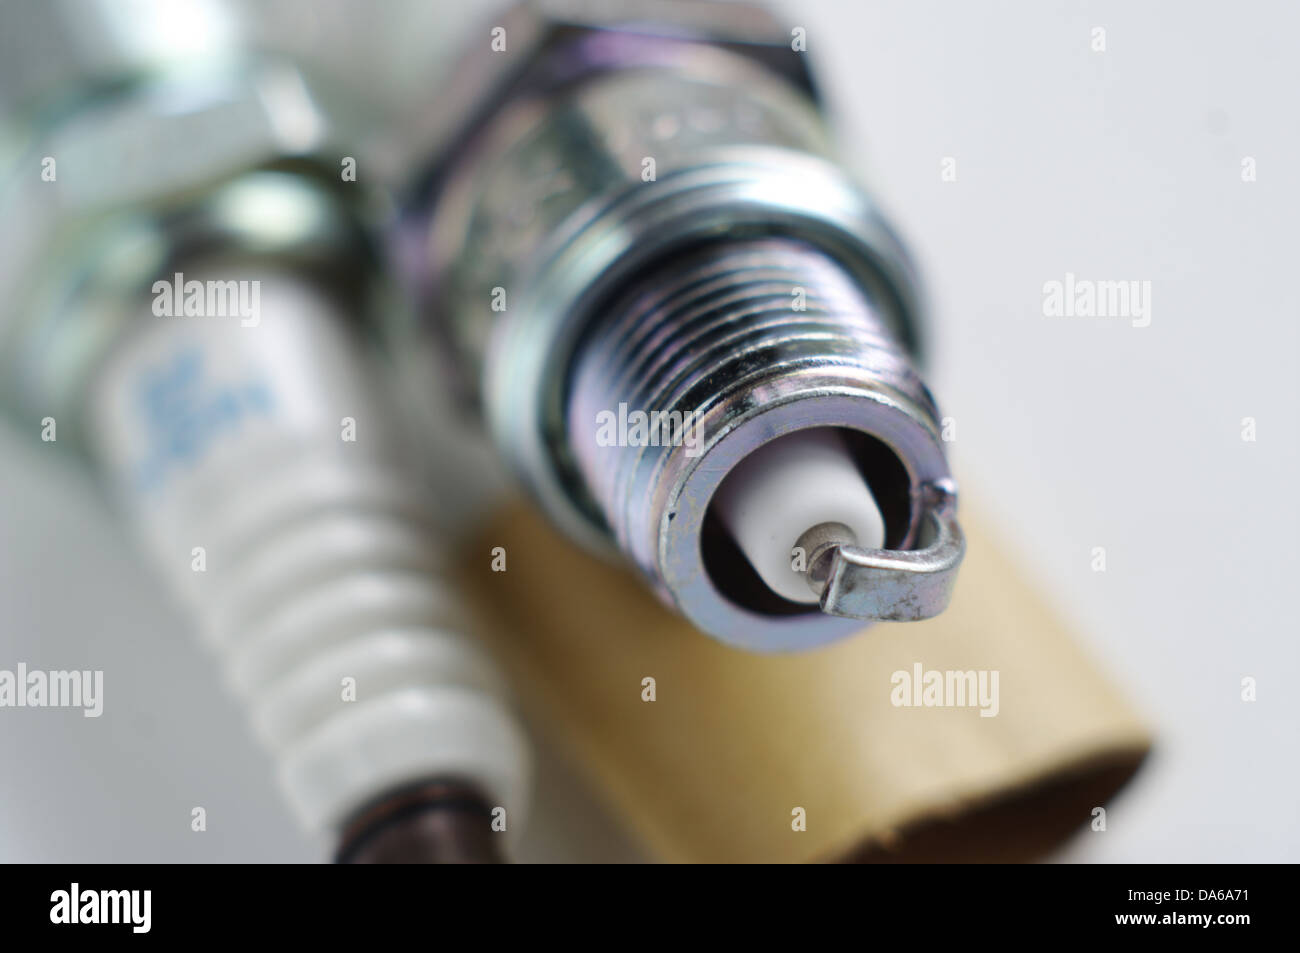 two spark plugs gap on the electrodes Stock Photo